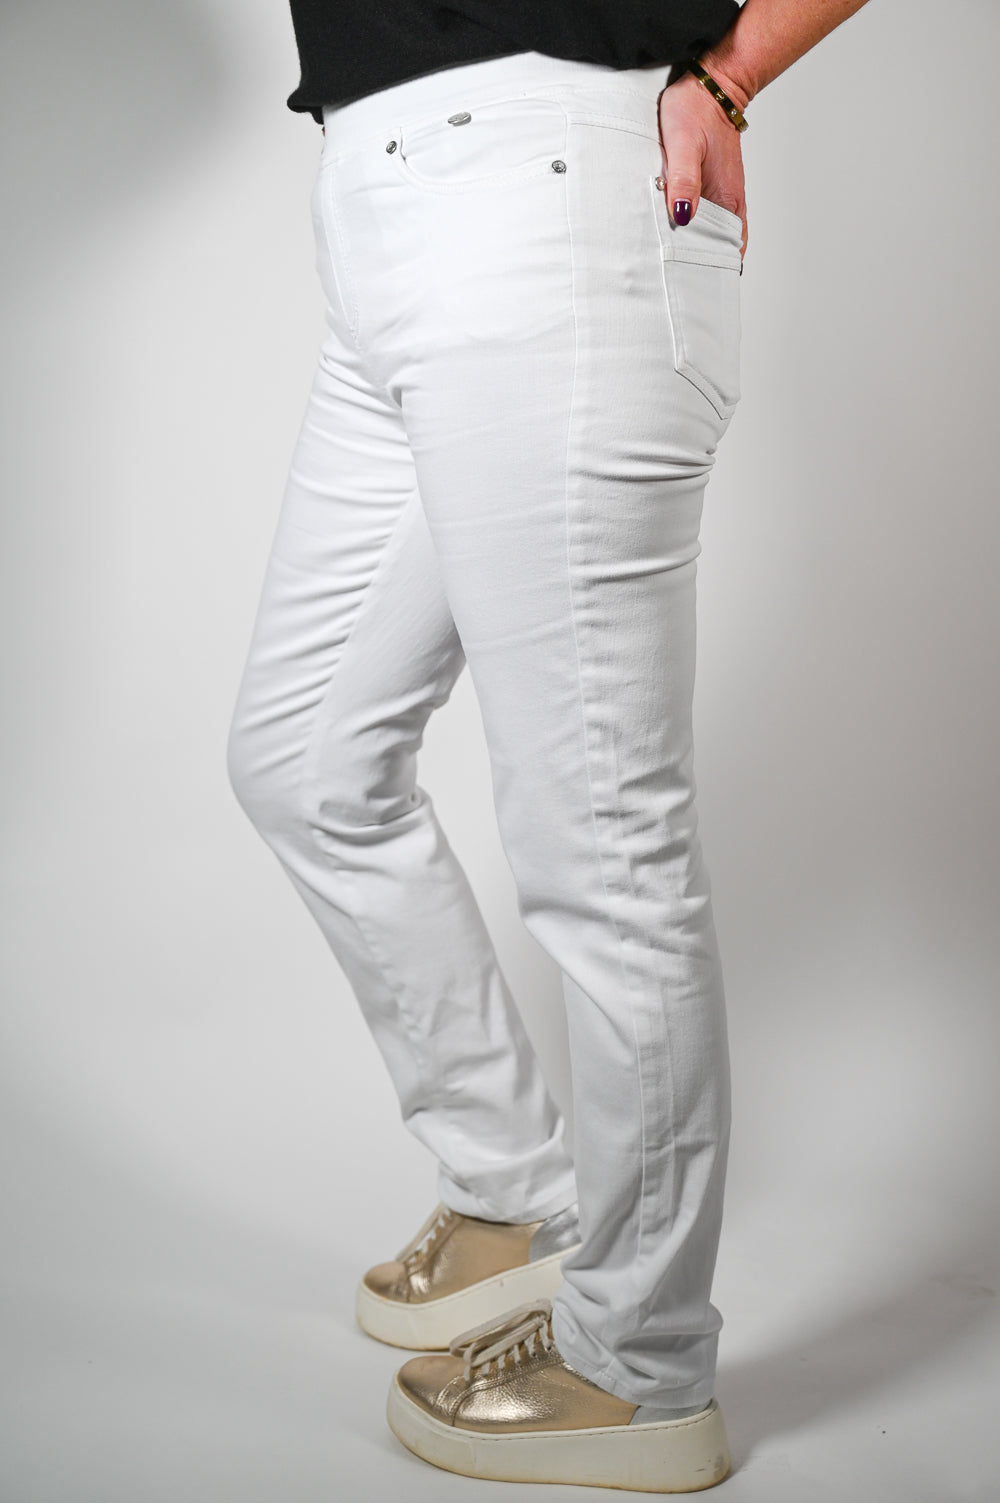 Anna Montana Jump In Jeans - White 1001